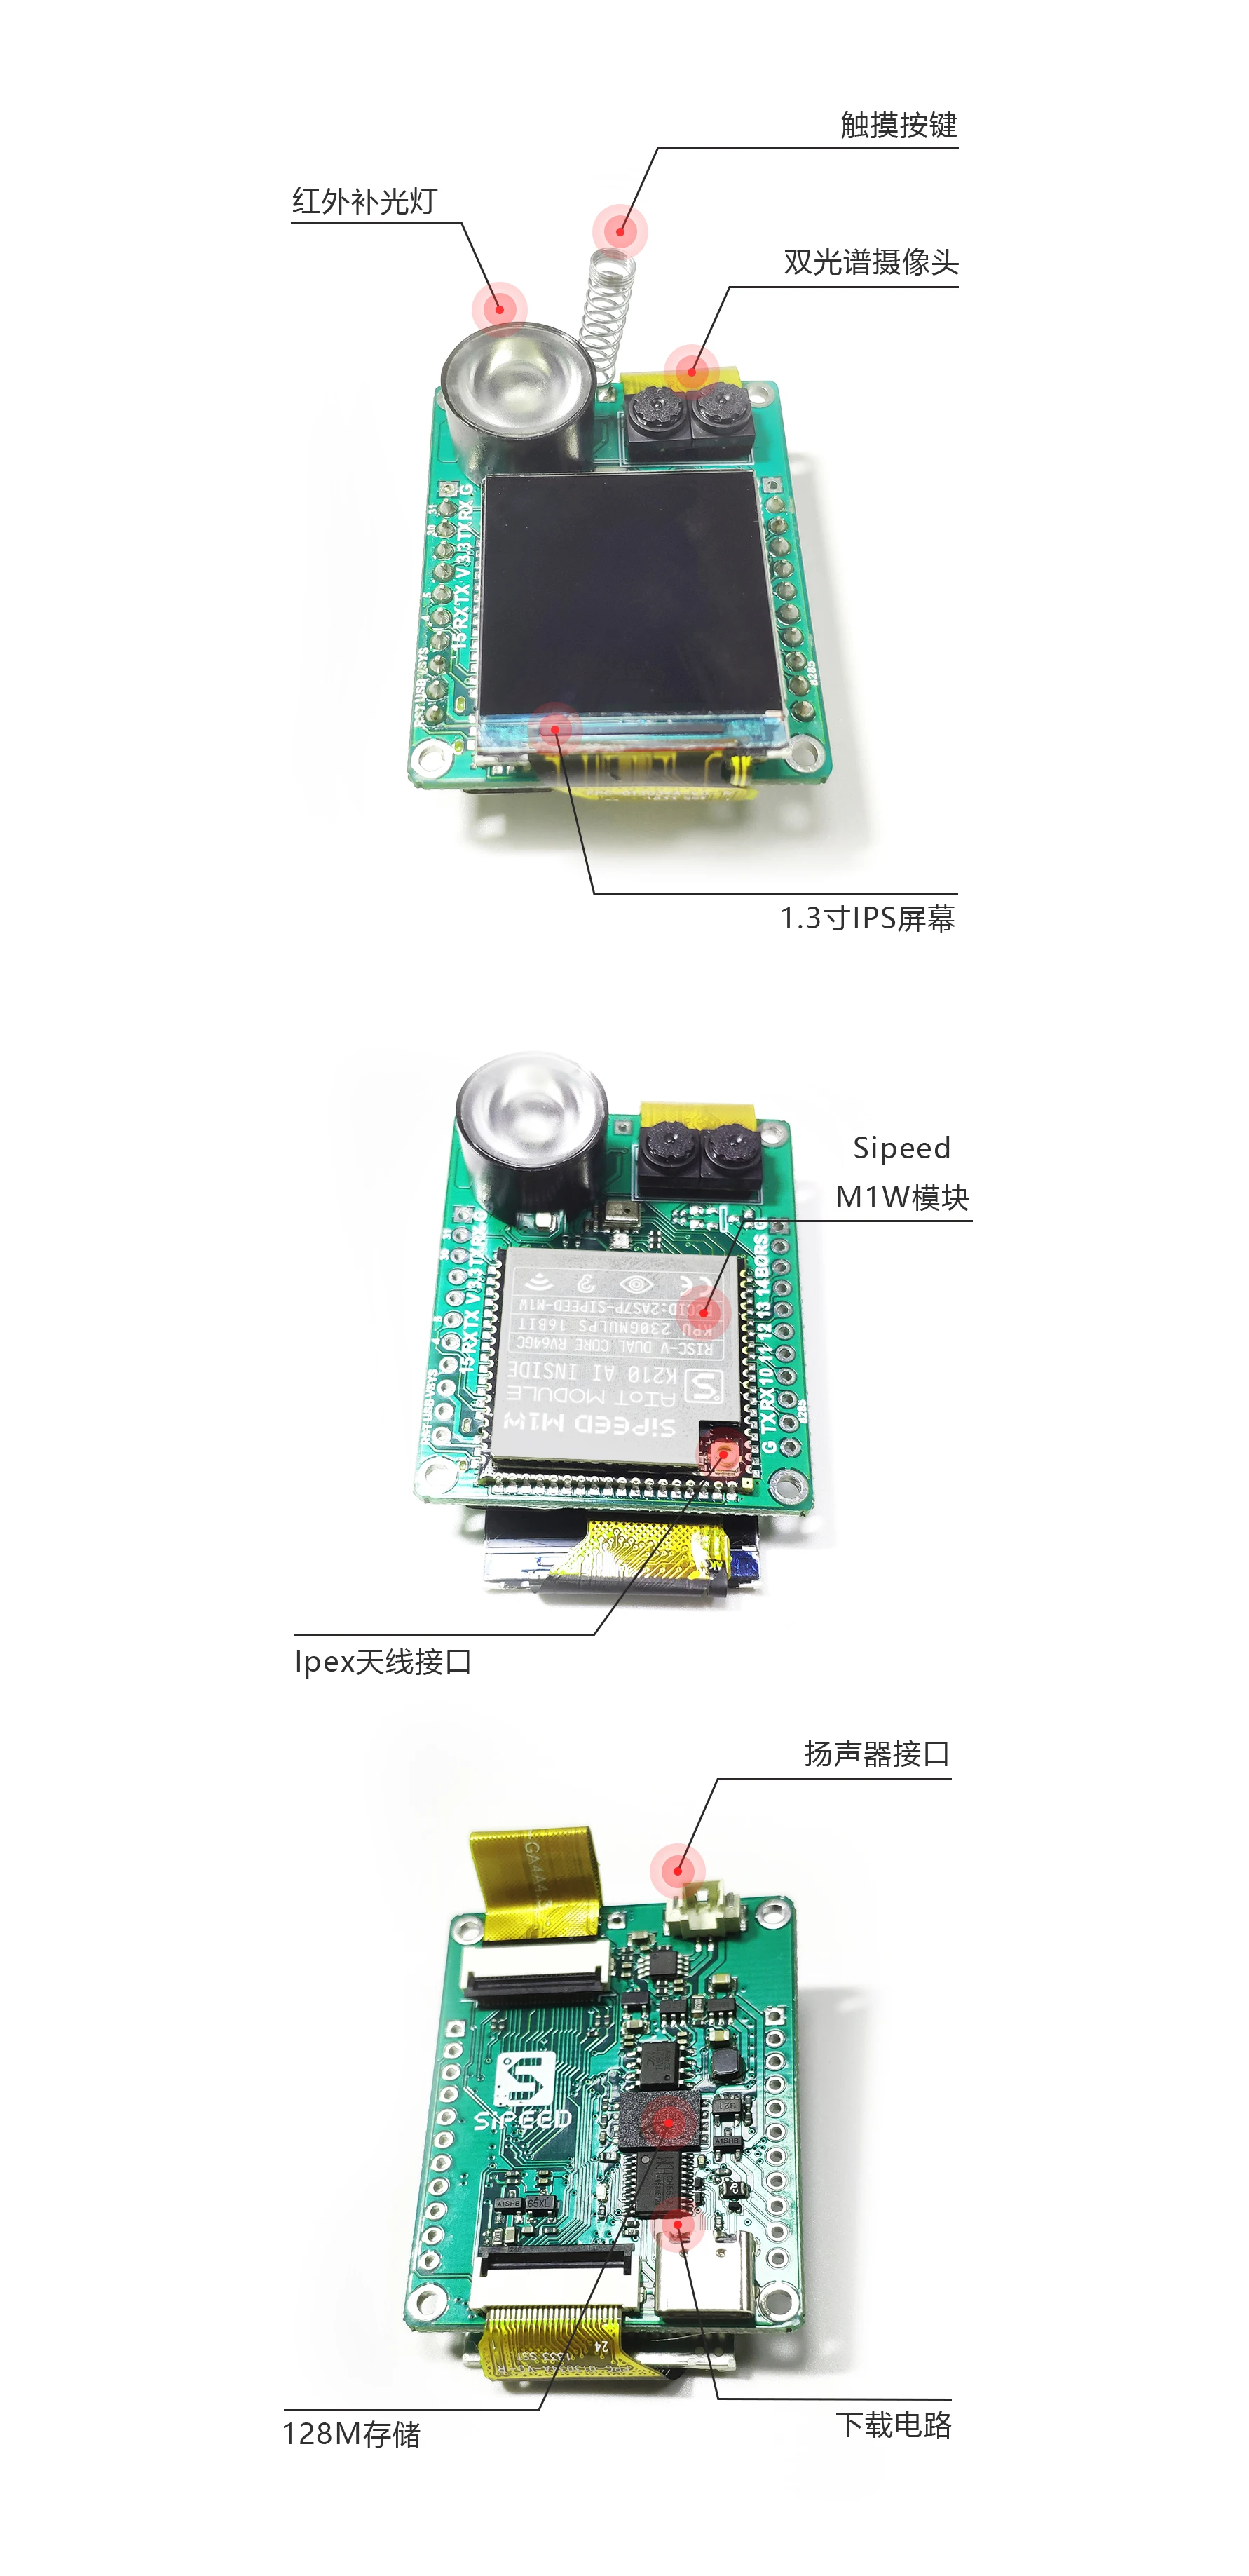 Sipeed MF1 AI+ IOT offline living face recognition module with firmware